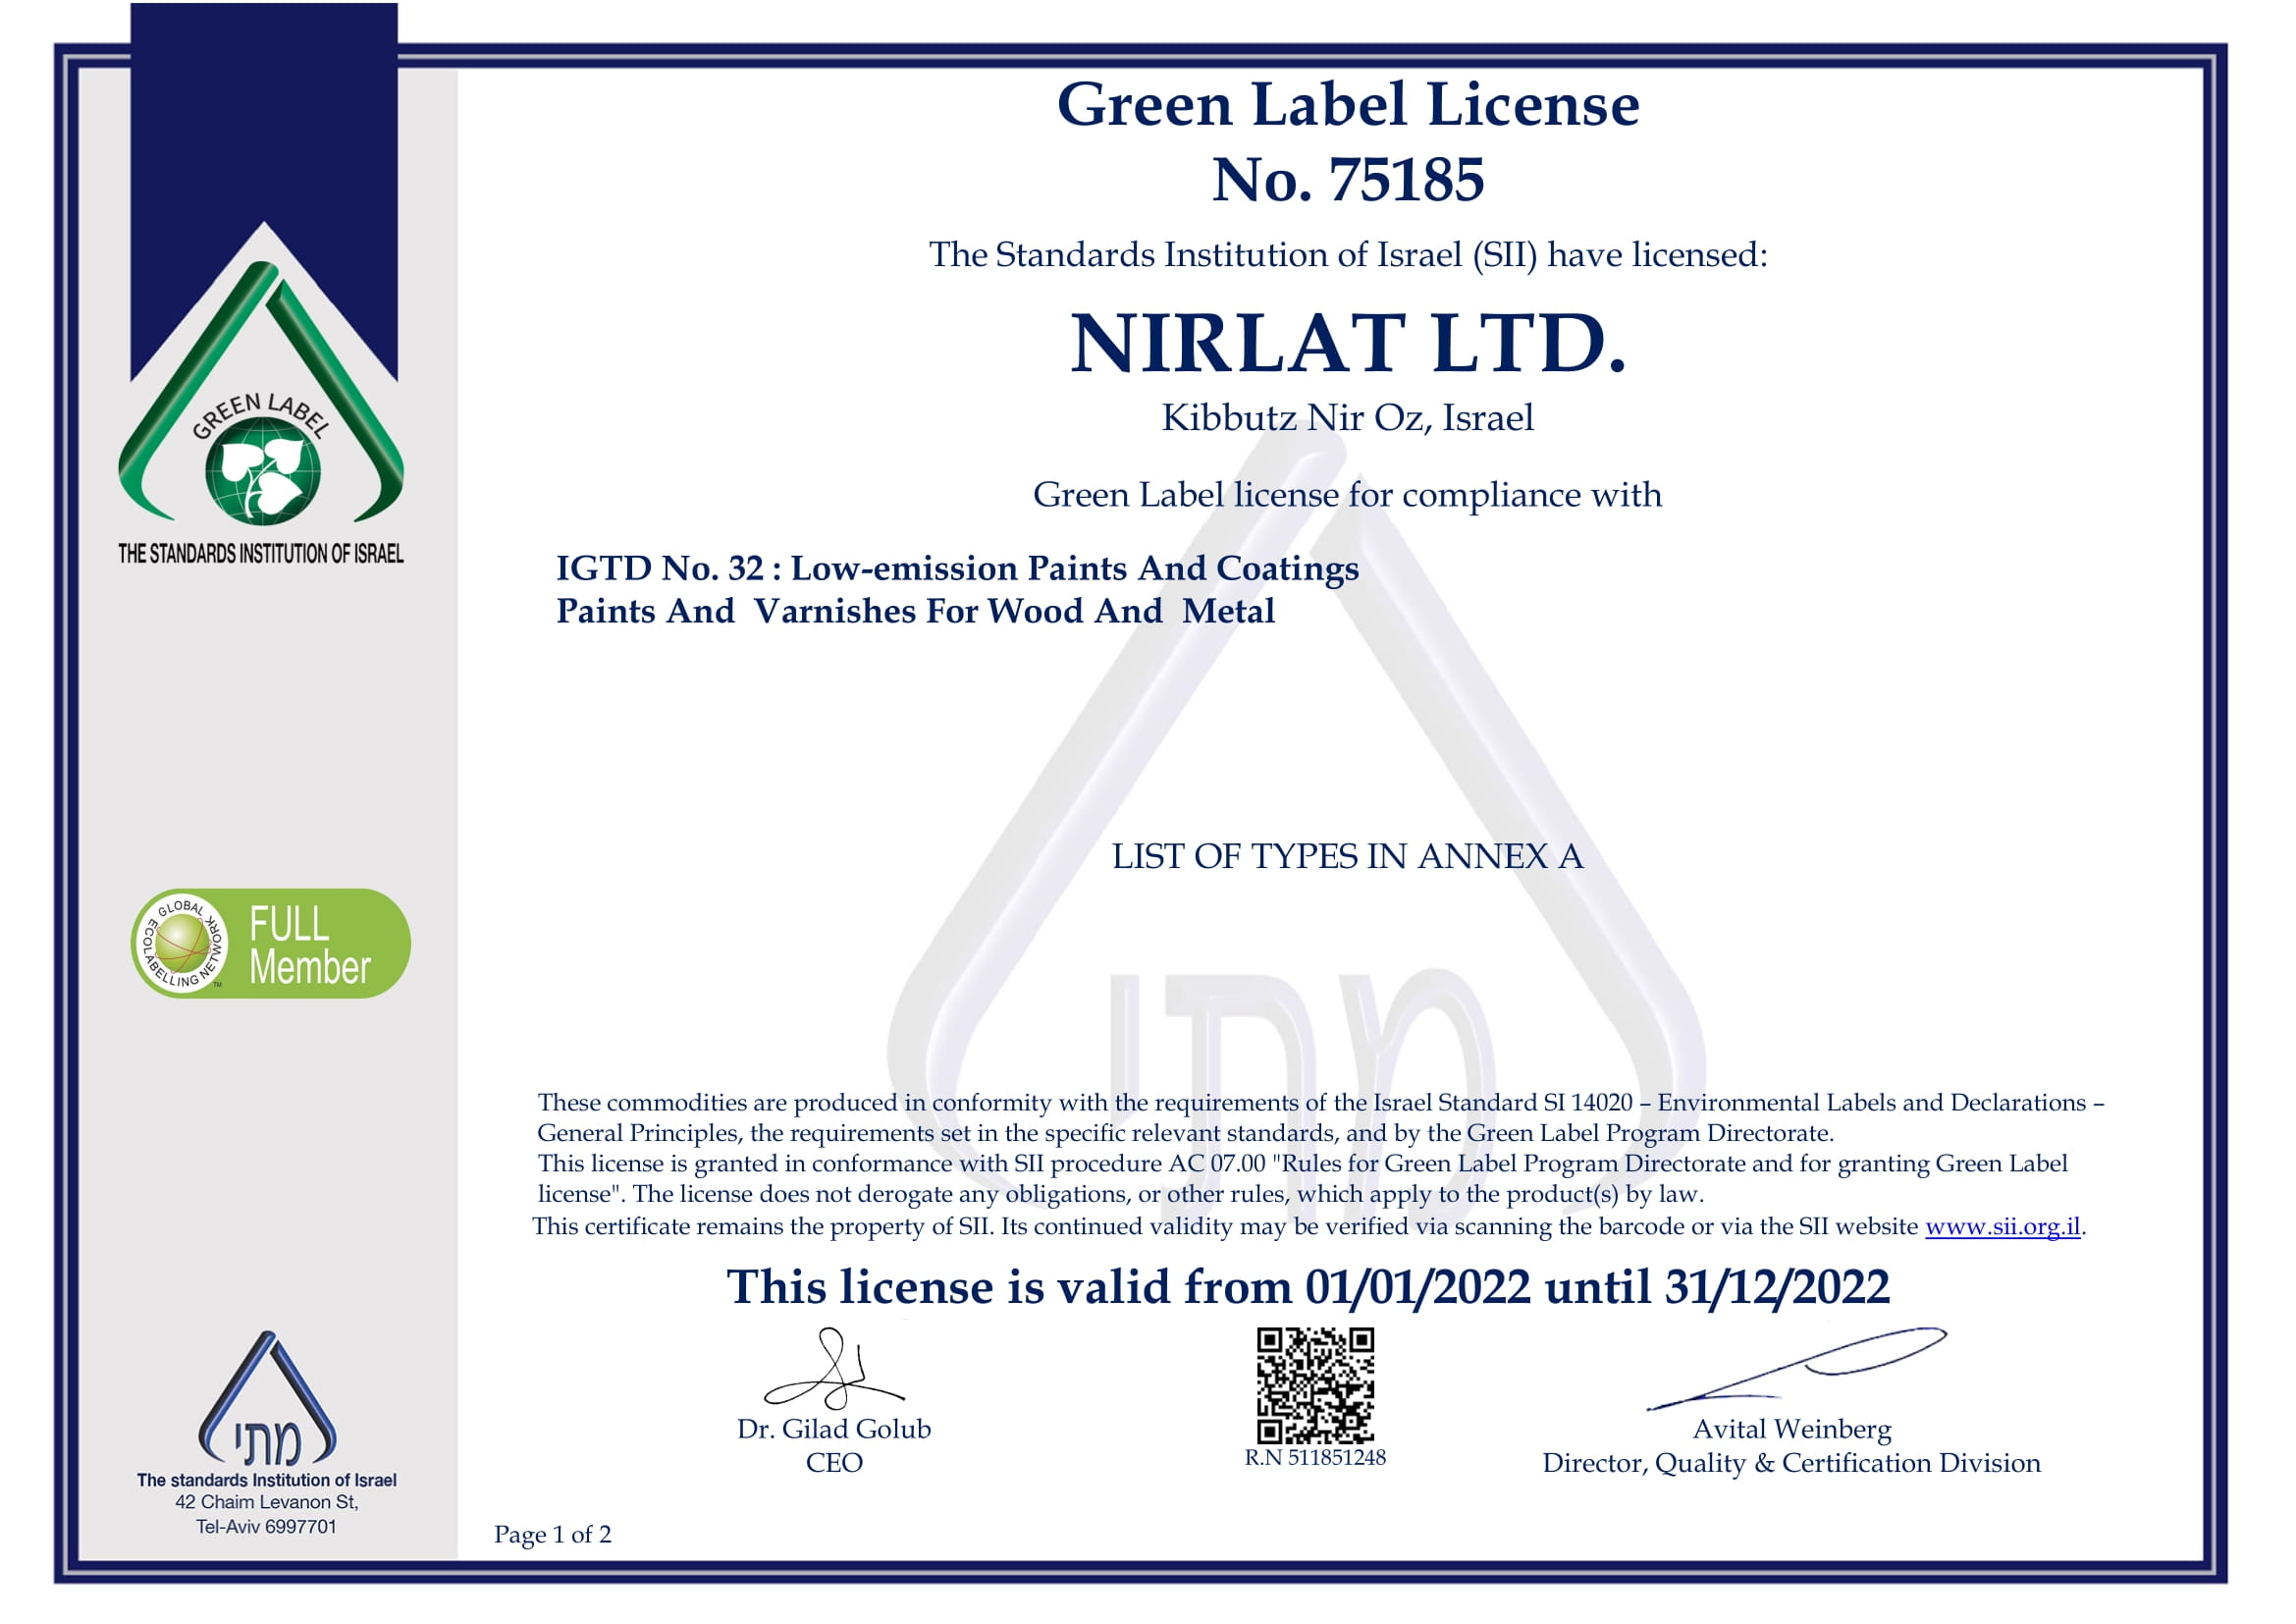 Green Label License Paints And Varnishes For Wood And Metal 2022